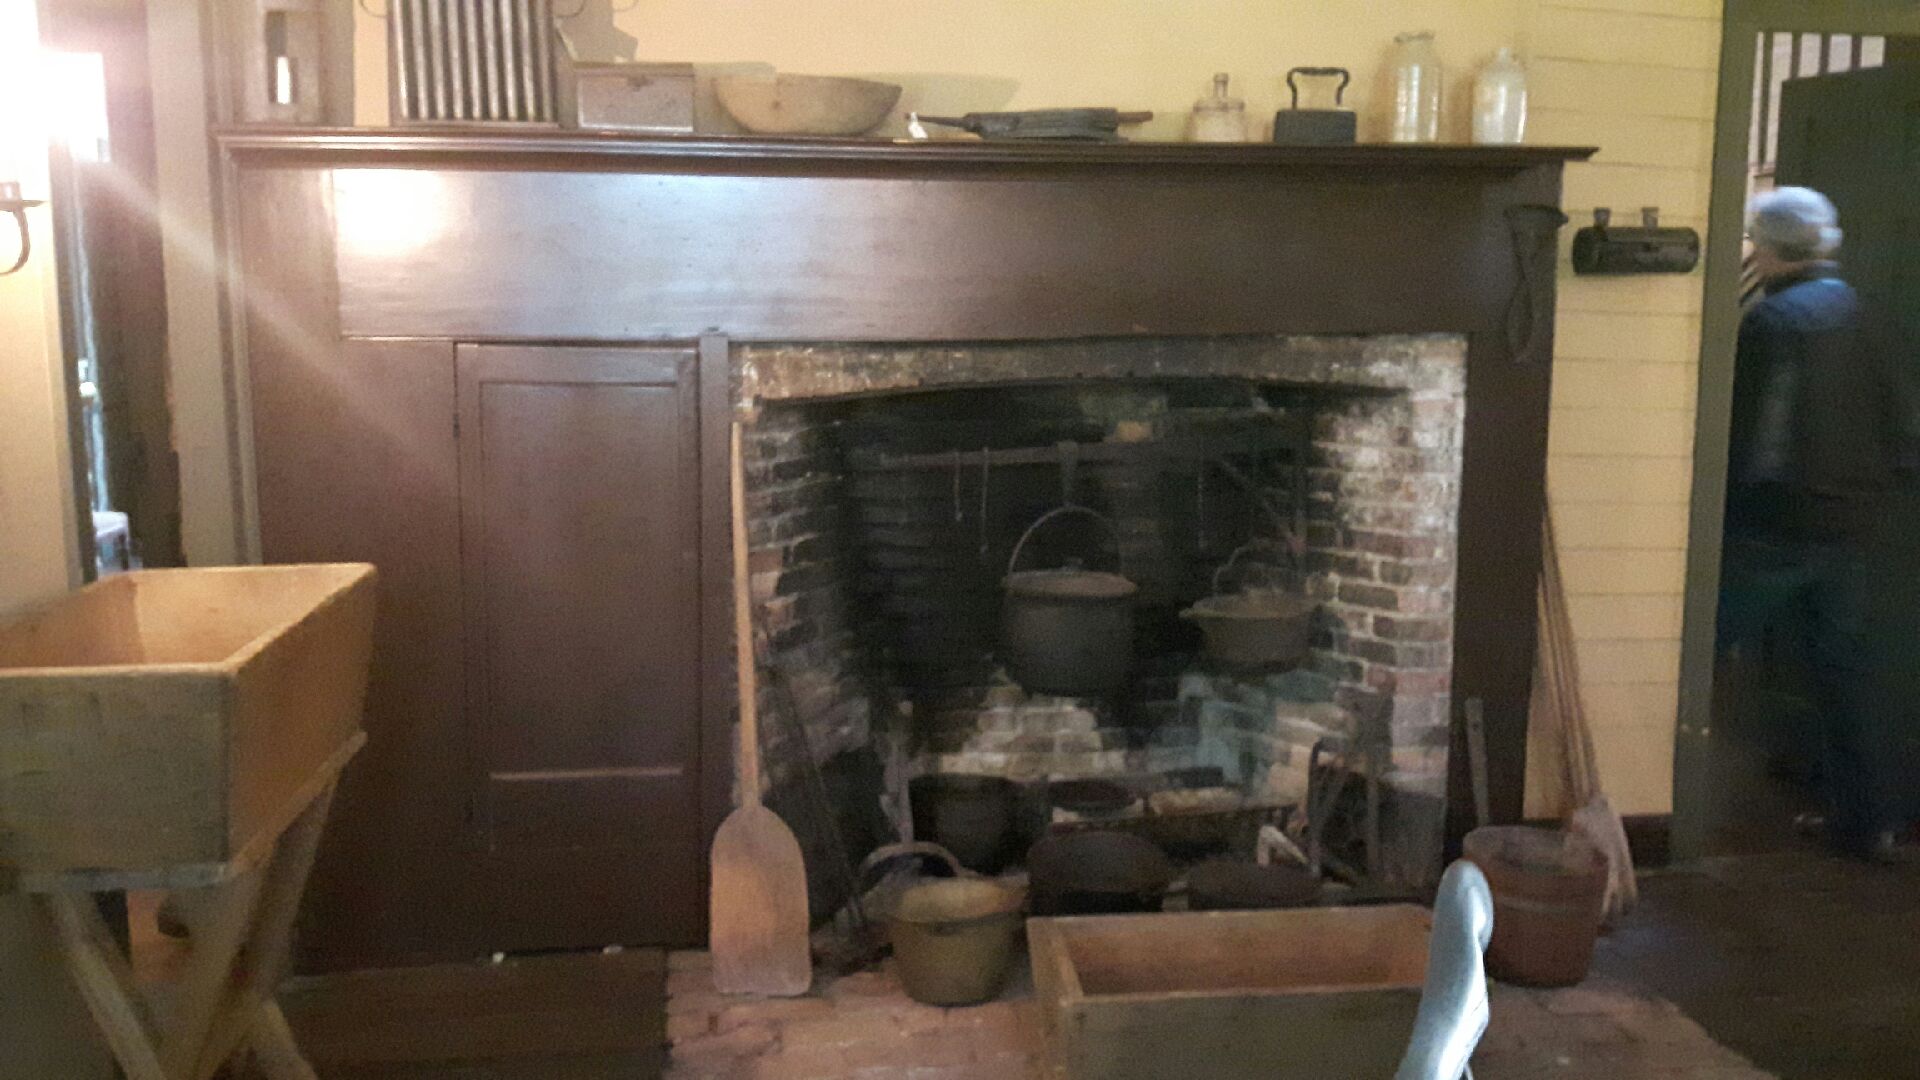  Barnum family meals were cooked in this fireplace 